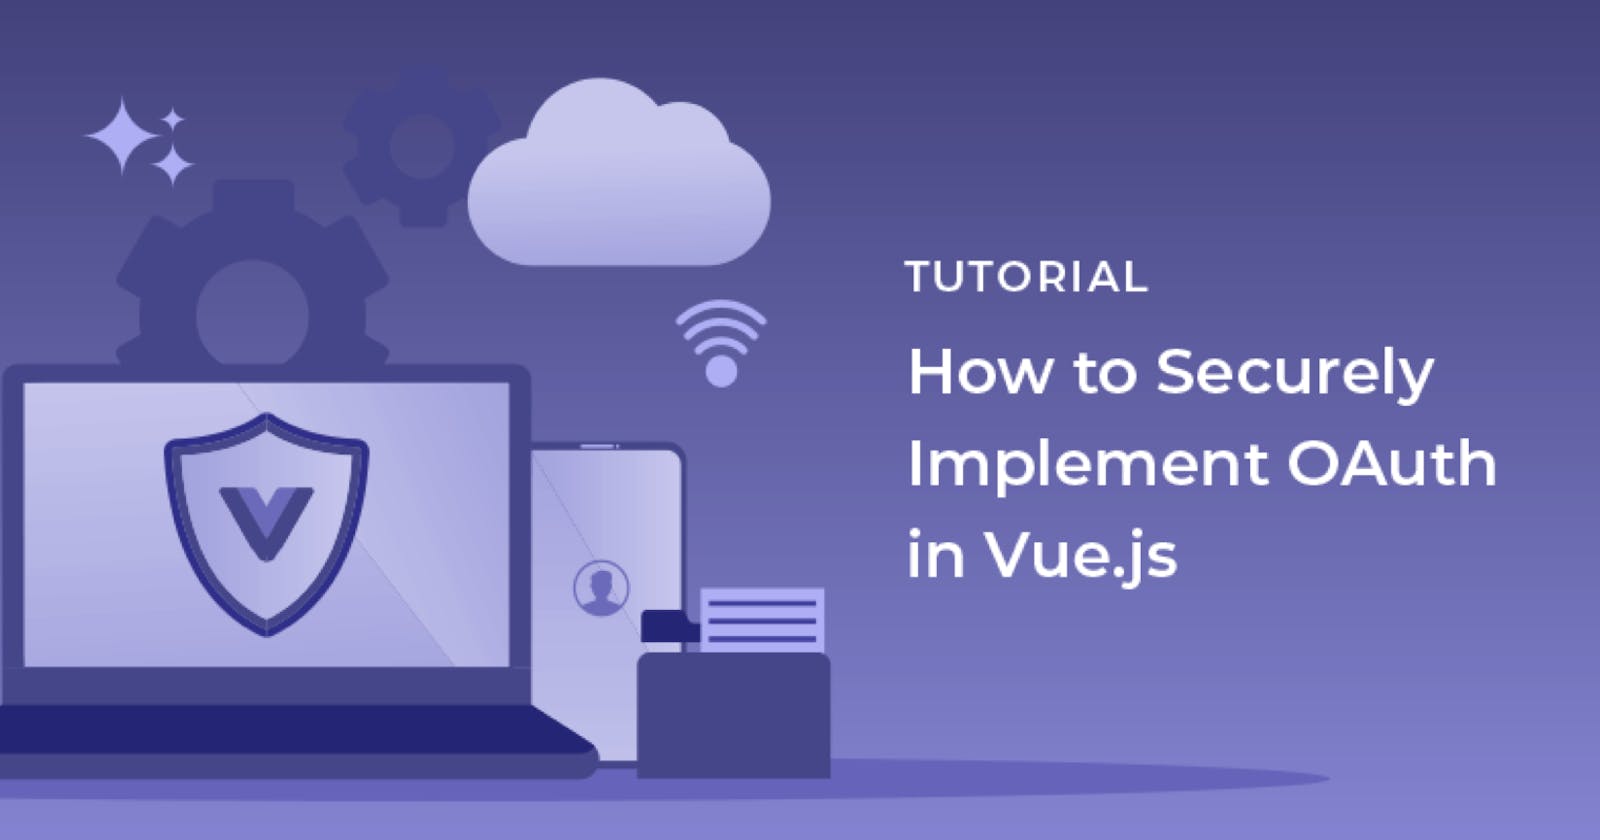 How to Securely Implement OAuth in Vue.js